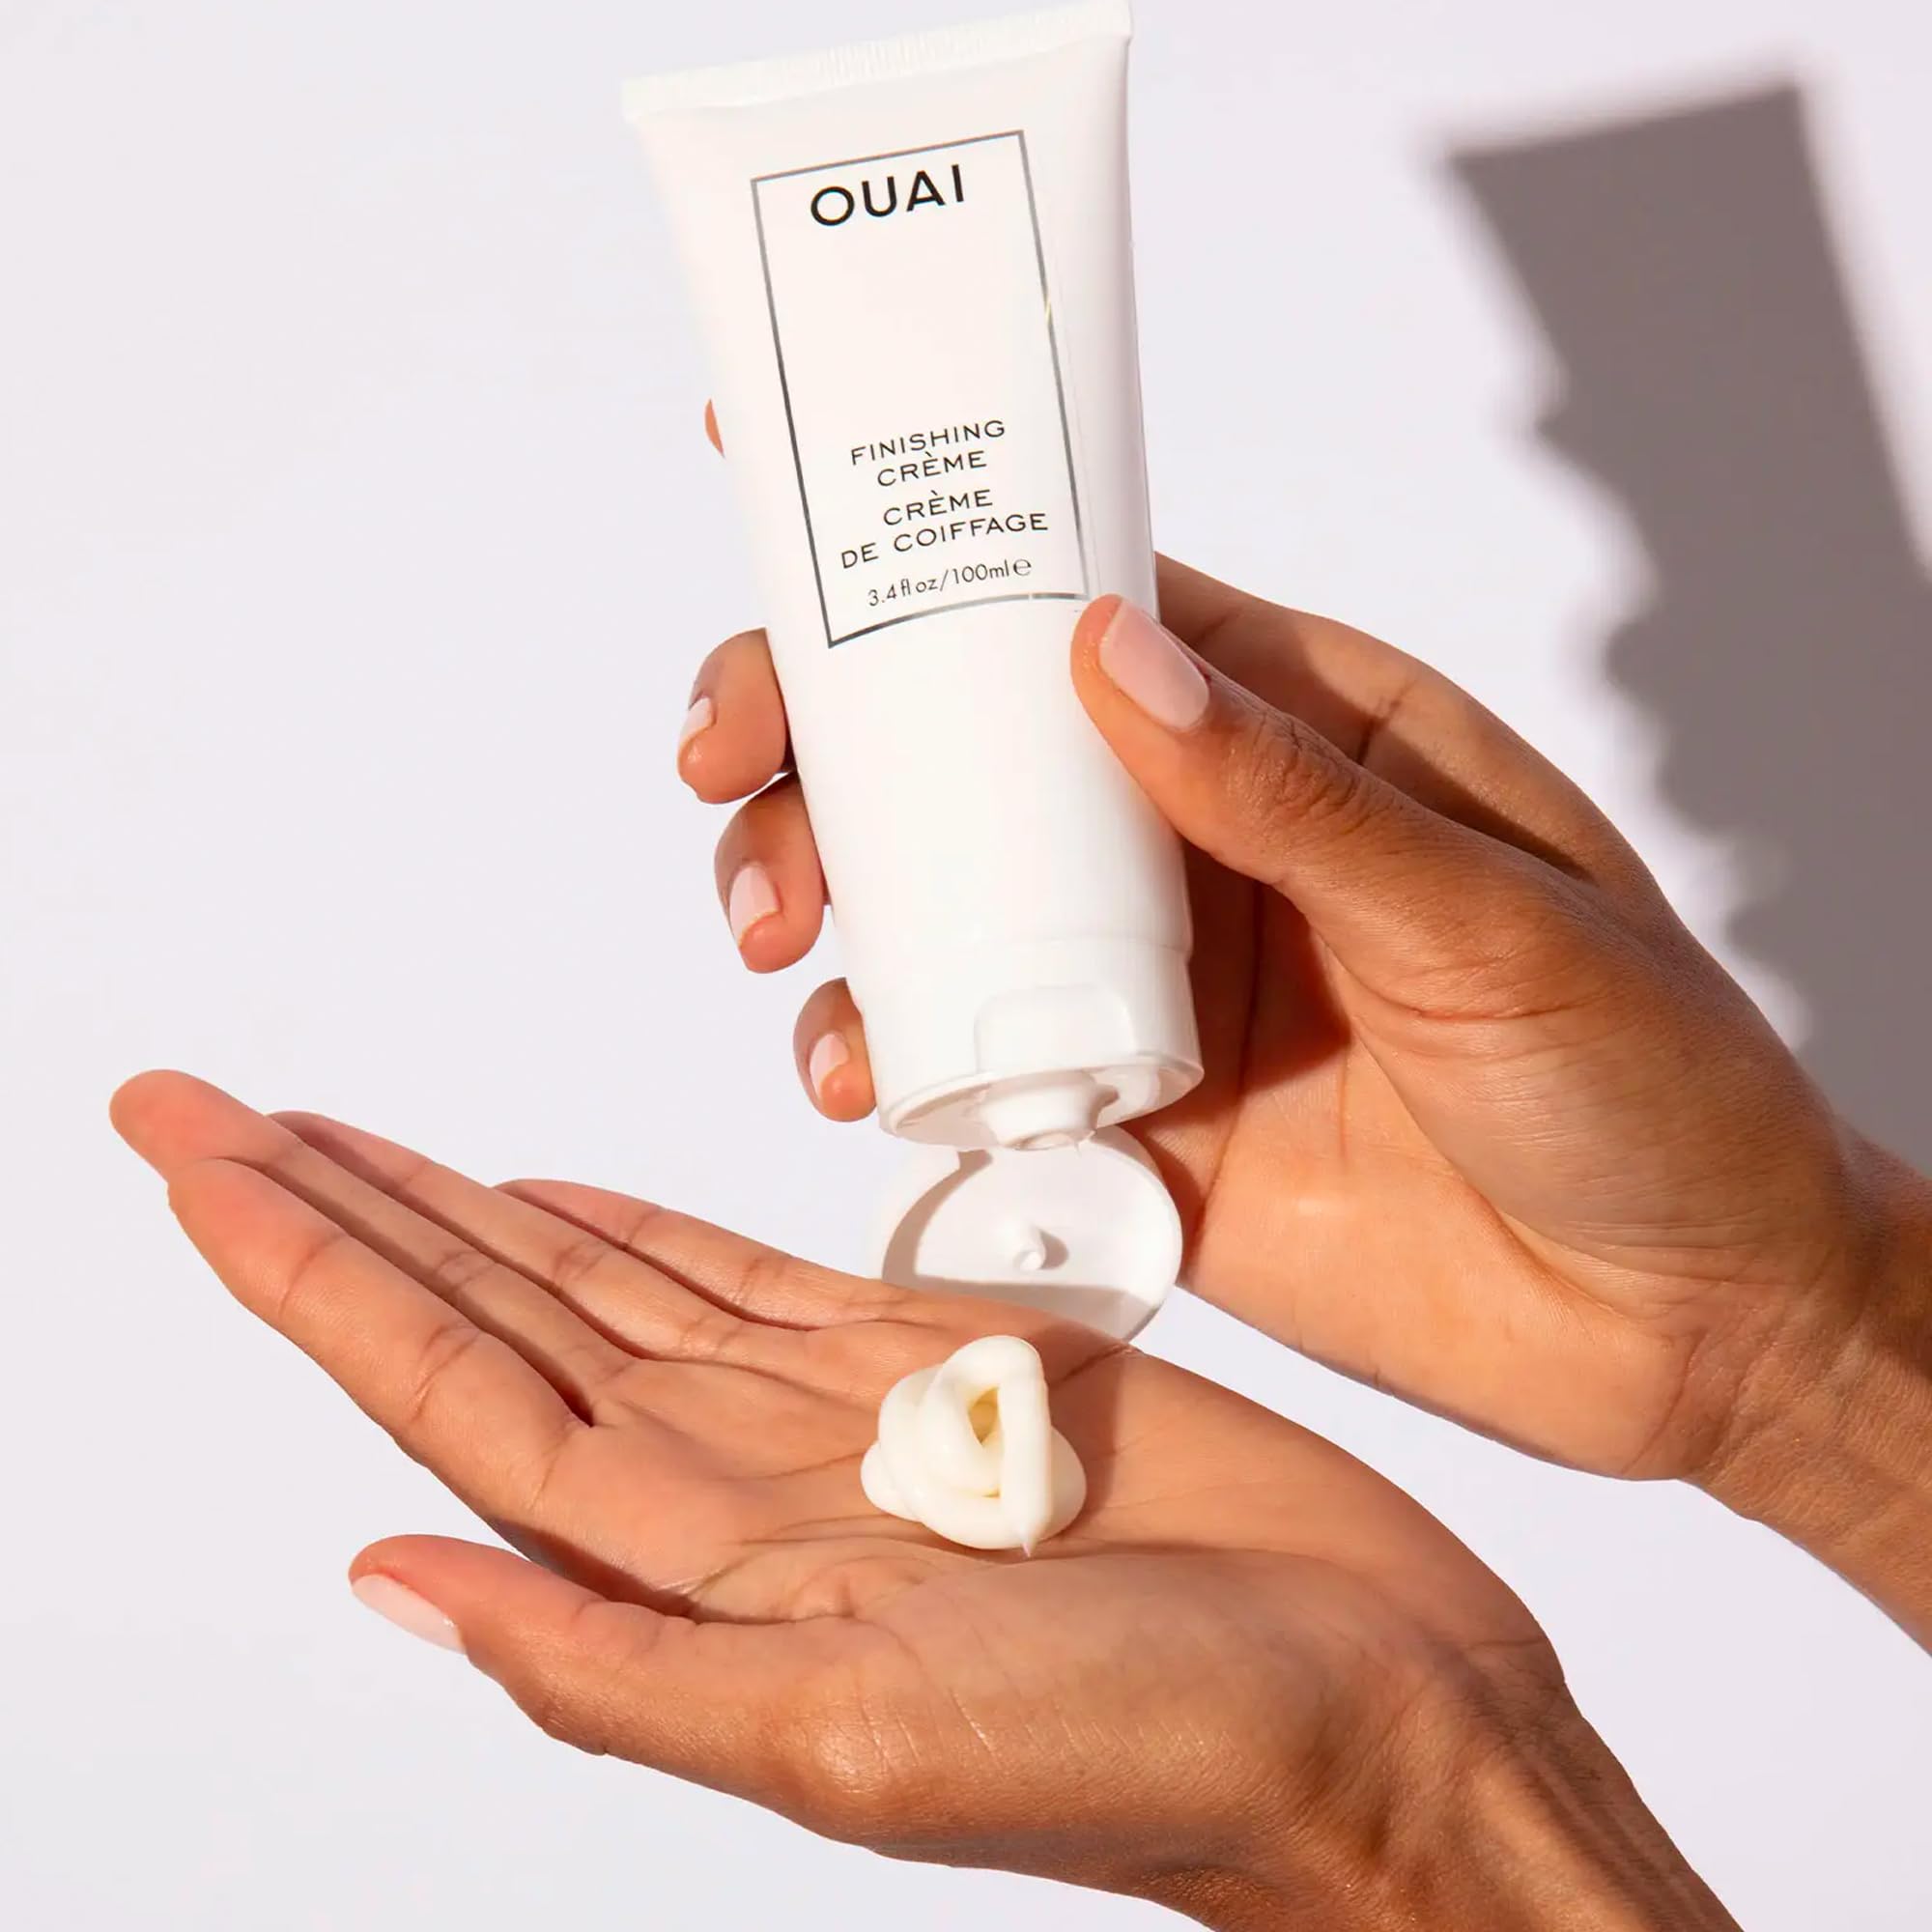 OUAI Finishing Creme - Lightweight Hydrating Cream - Protects from Heat Styling, Smooths Dry, Split Ends, Tames Frizz & Adds Shine and Body - Free of Parabens and Phthalates - 3.4 fl oz